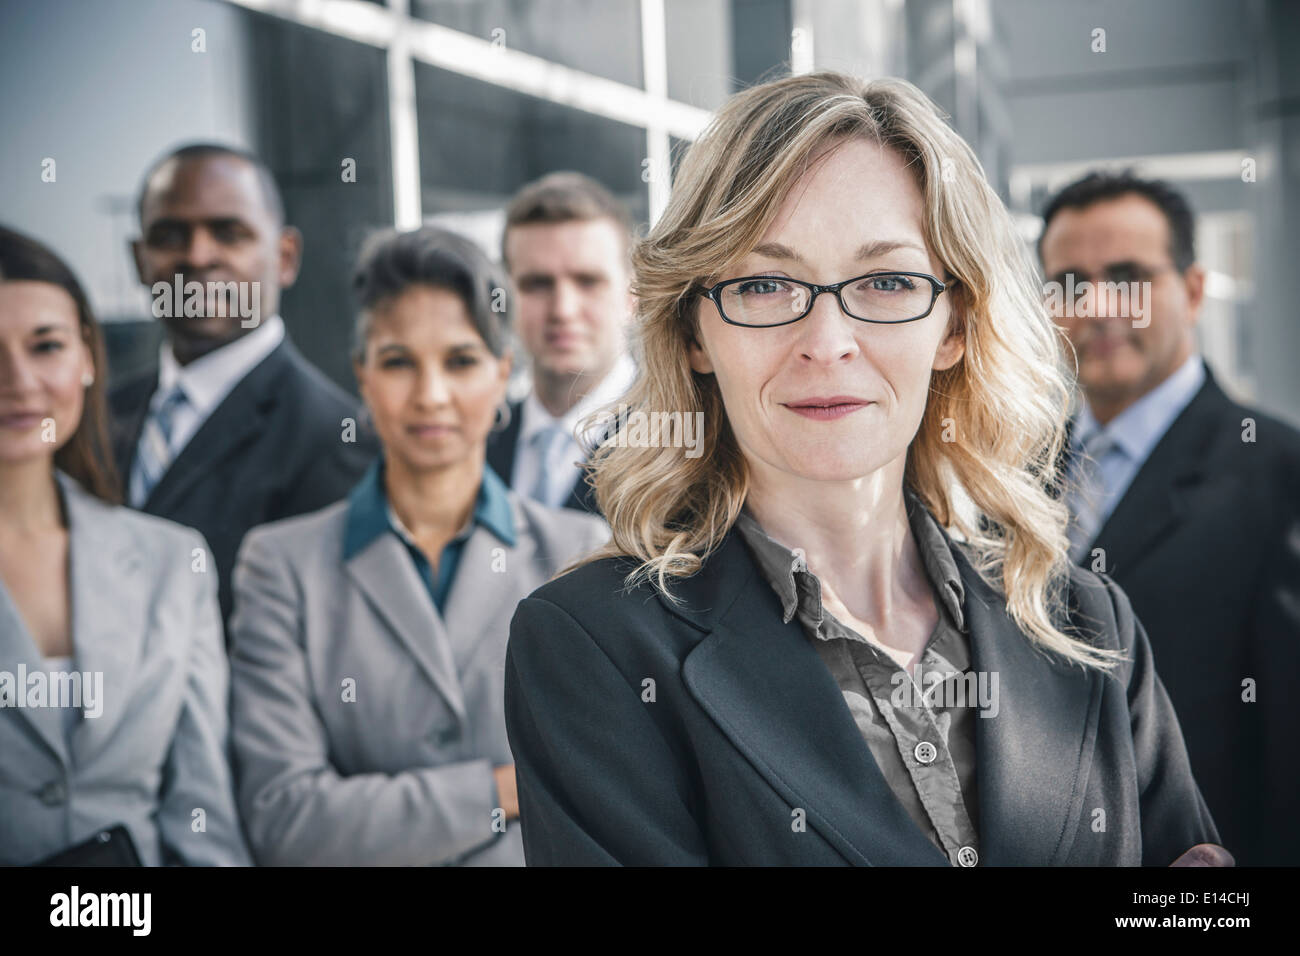 Business people smiling outdoors Stock Photo